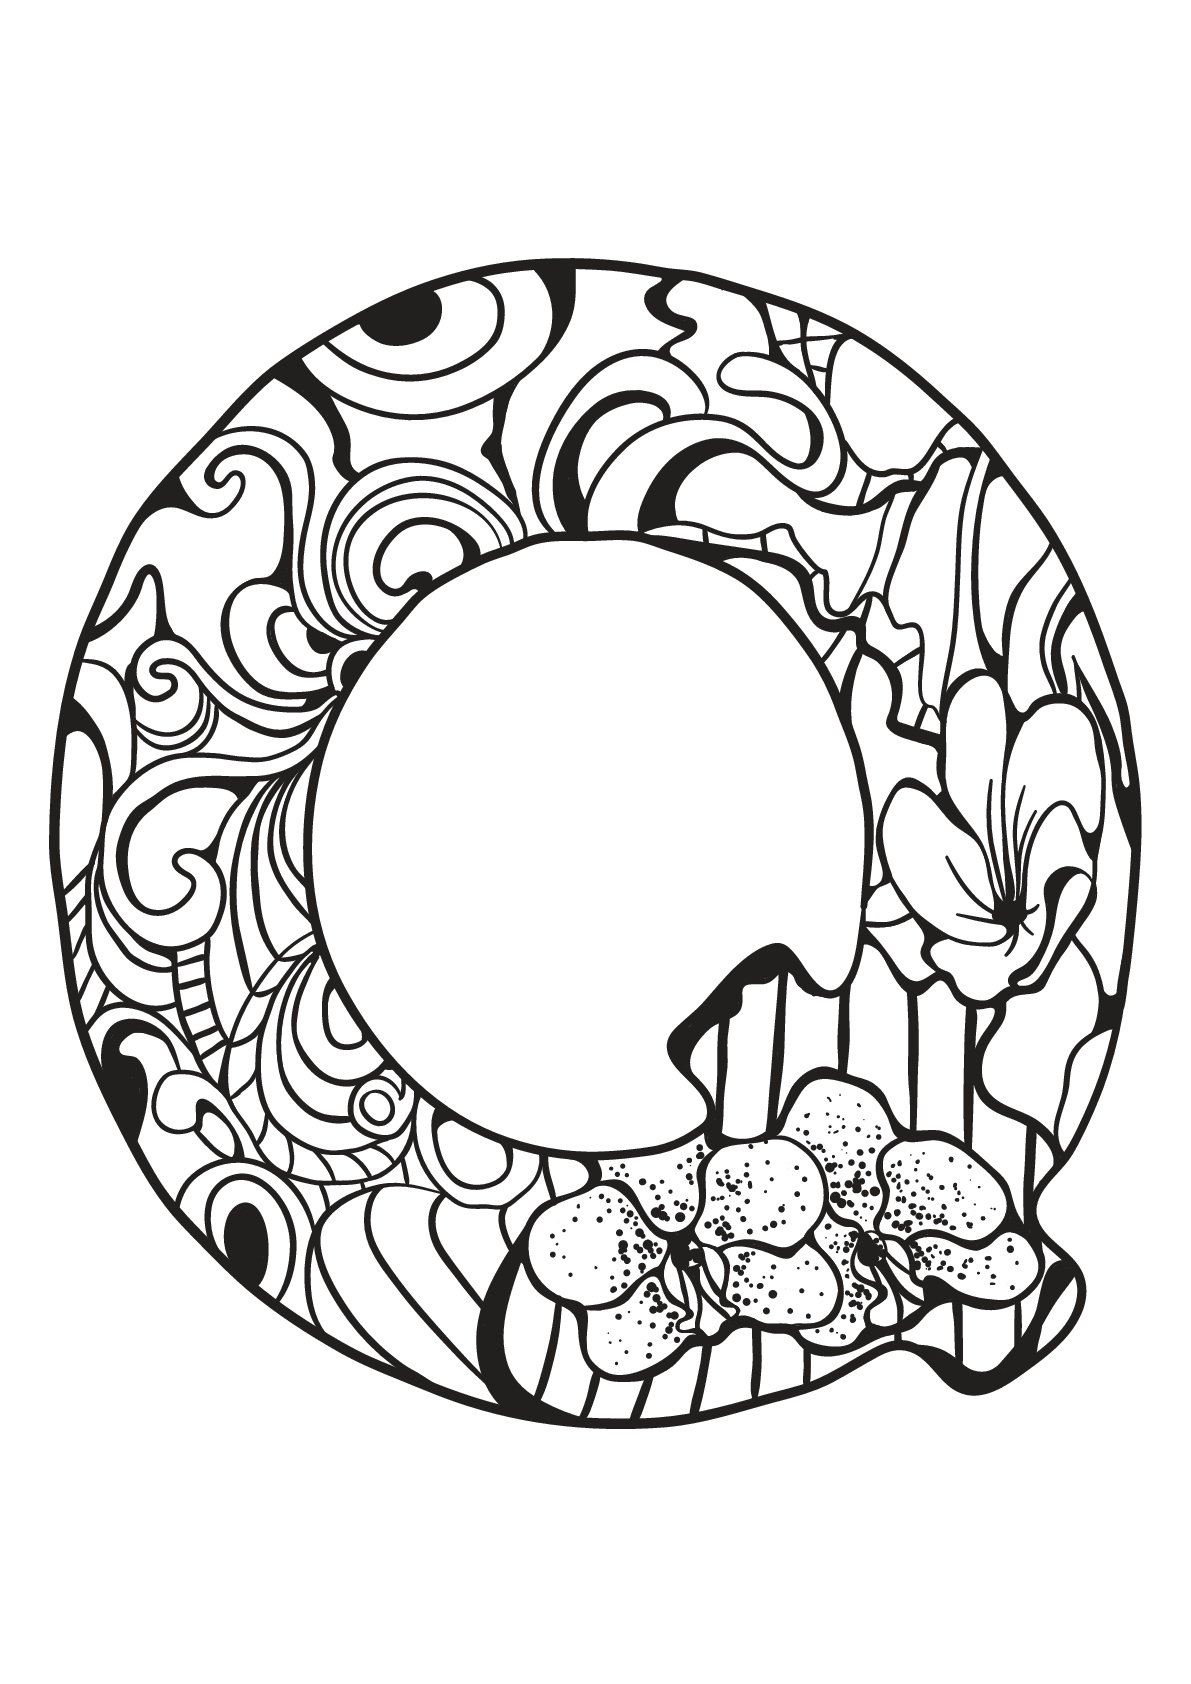 Alphabet coloring page to print and color for free : Q